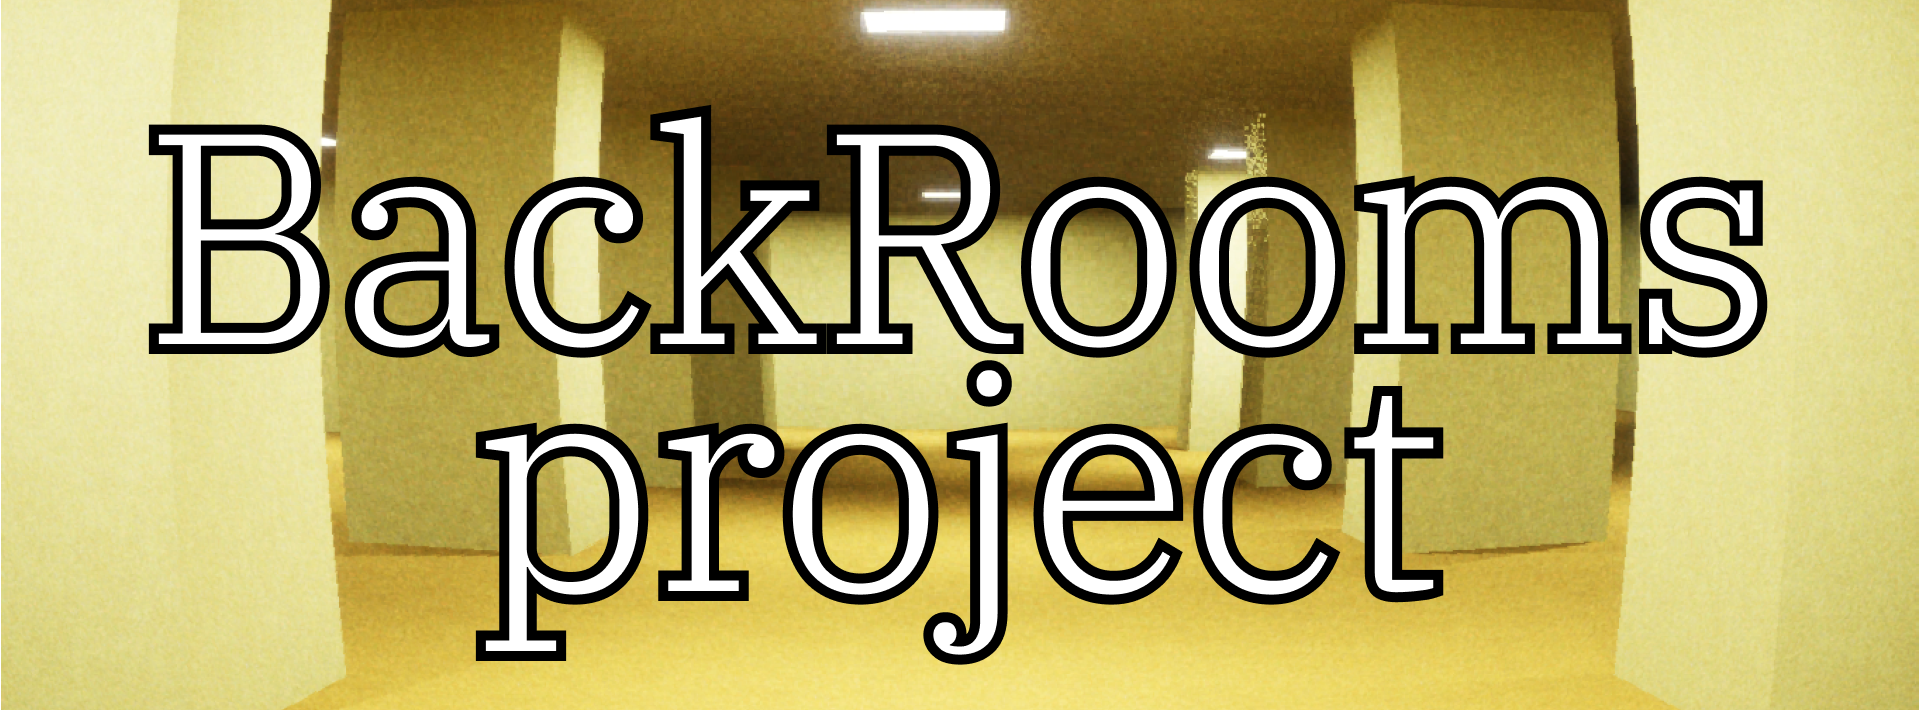 BackRooms Project